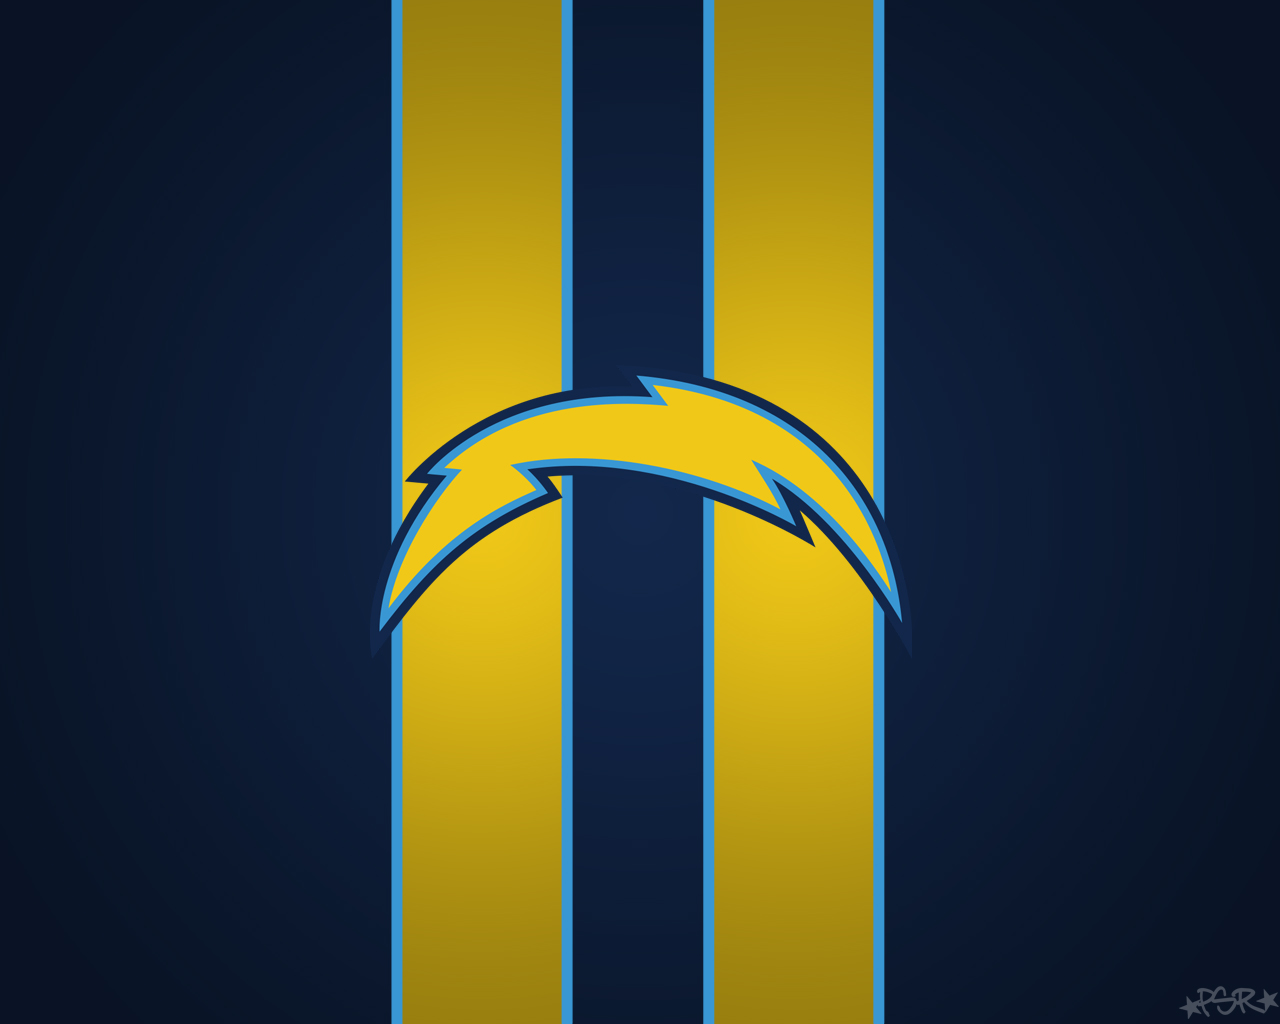 Chargers wallpaper 1280x1024